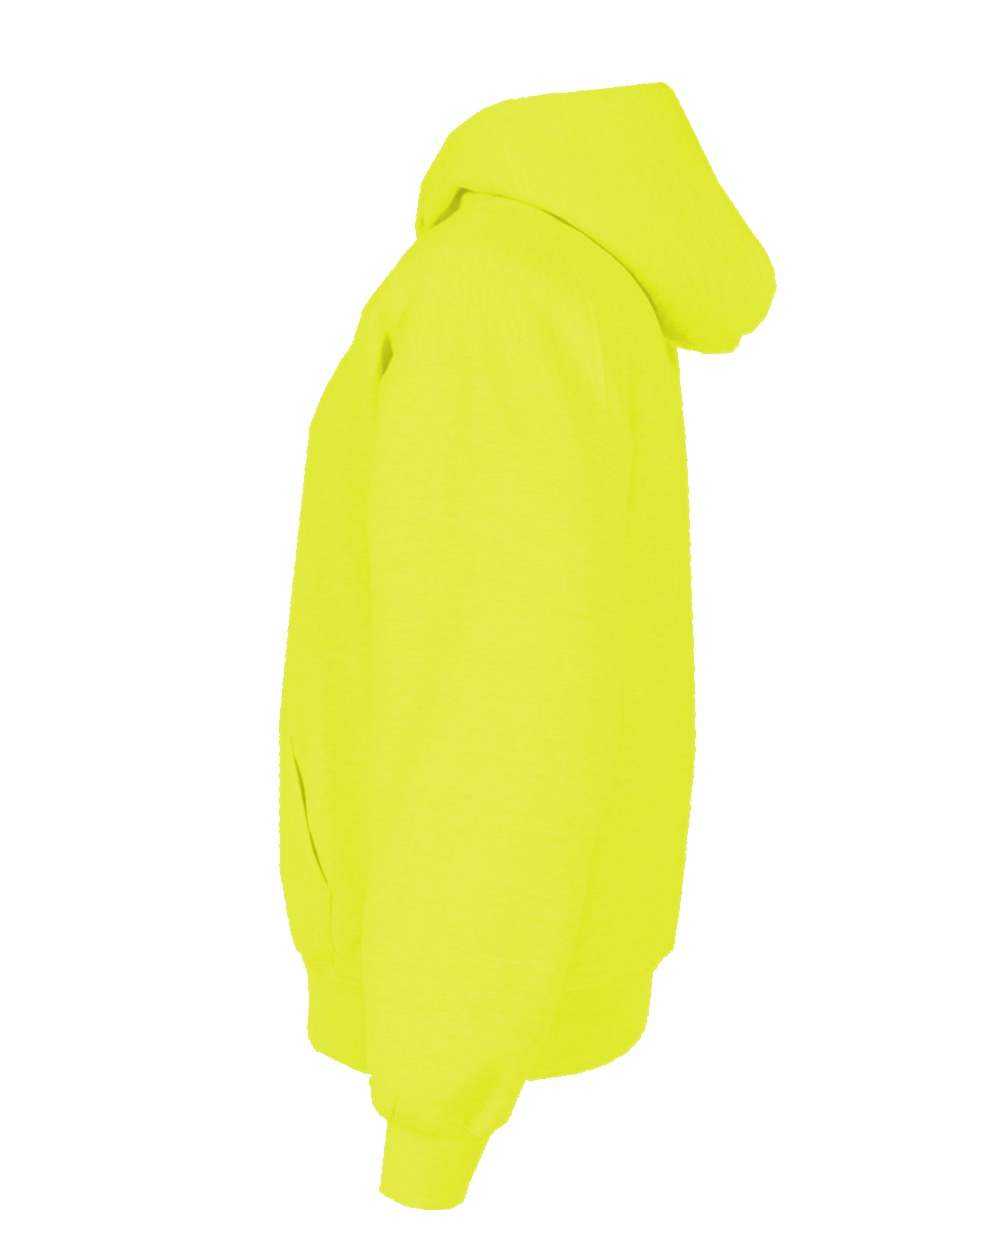 Badger Sport 1254 Hooded Sweatshirt - Safety Yellow - HIT a Double - 1